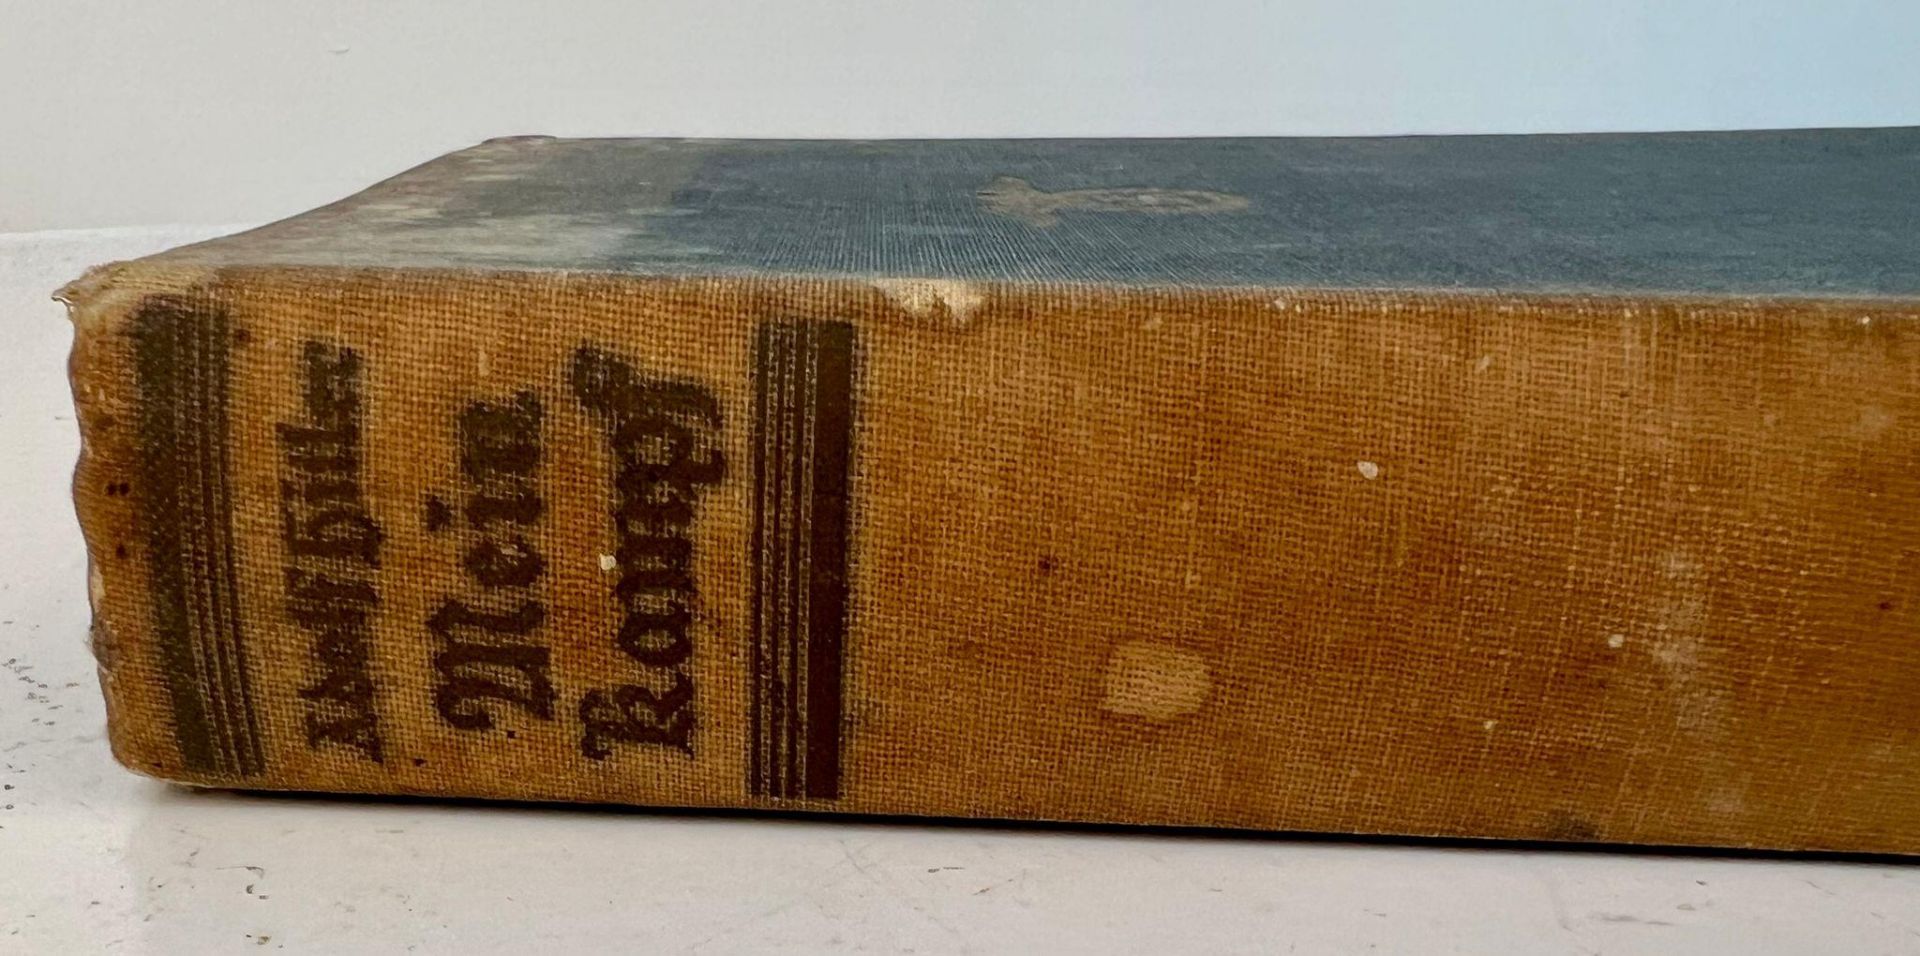 A Very Rare 1939 Original Adolf Hitler ‘Mein Kamph’ Hard Back Book. This is the Unexpurgated Edition - Image 2 of 3